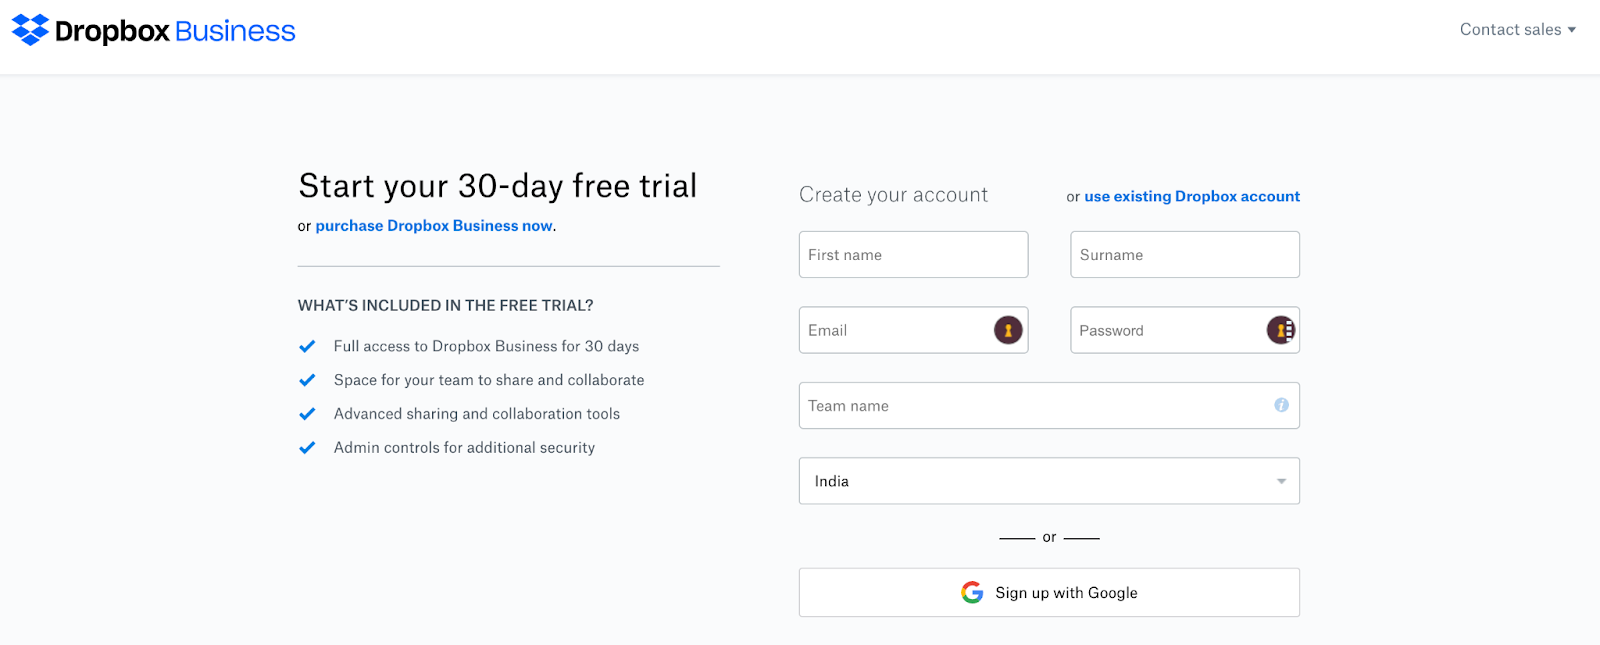 Free trial offering by Dropbox